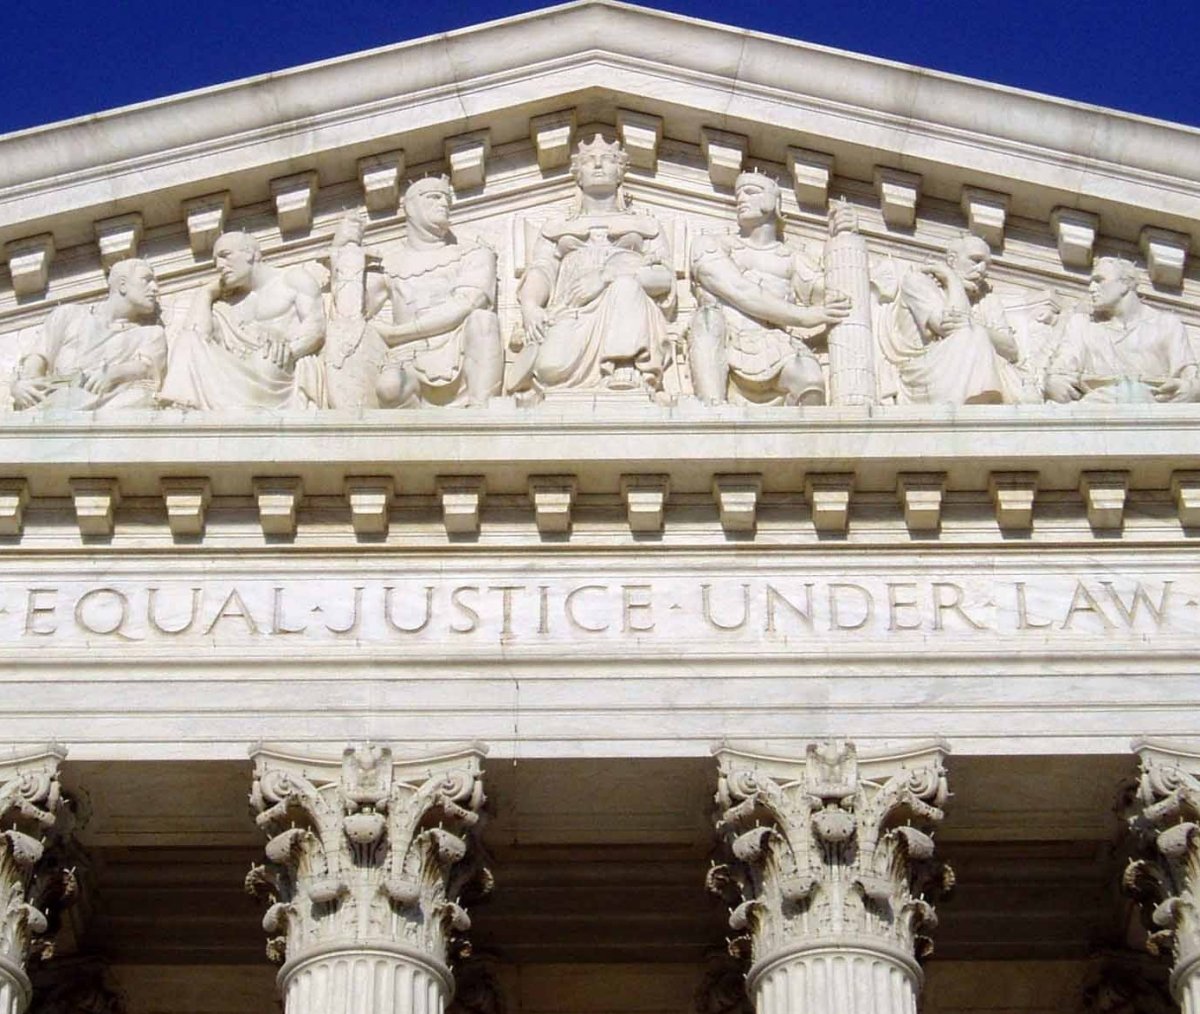 The inscription 'Equal Justice Under Law,' inspired by the Fourteenth Amendment, on the west pediment of the U.S. Supreme Court Building.